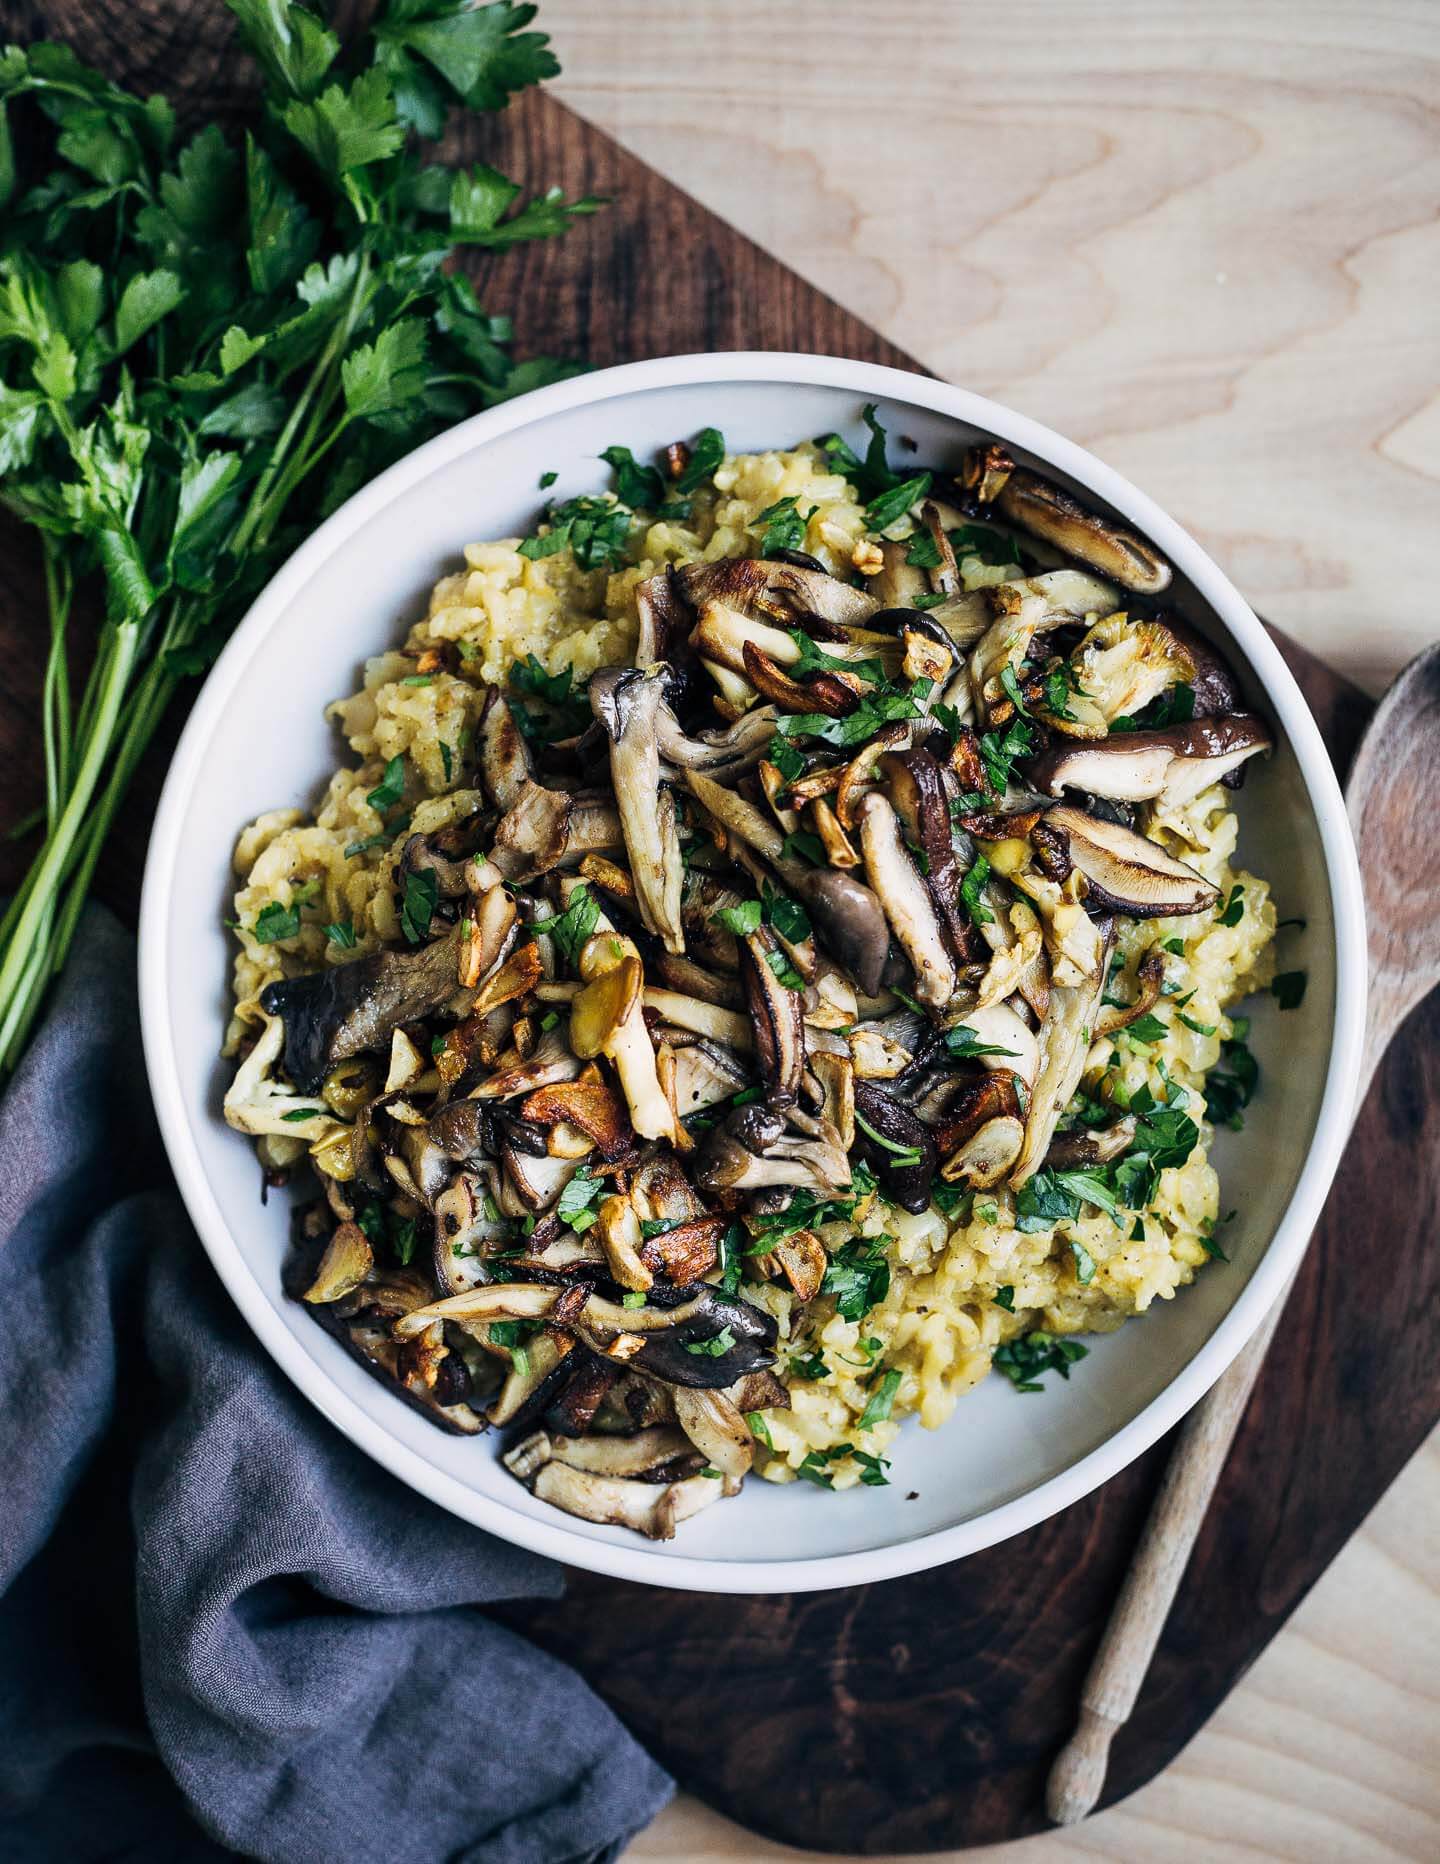 This creamy, umami-rich vegan risotto is made in an Instant Pot and topped with crispy-edged mushrooms and nutty toasted garlic.